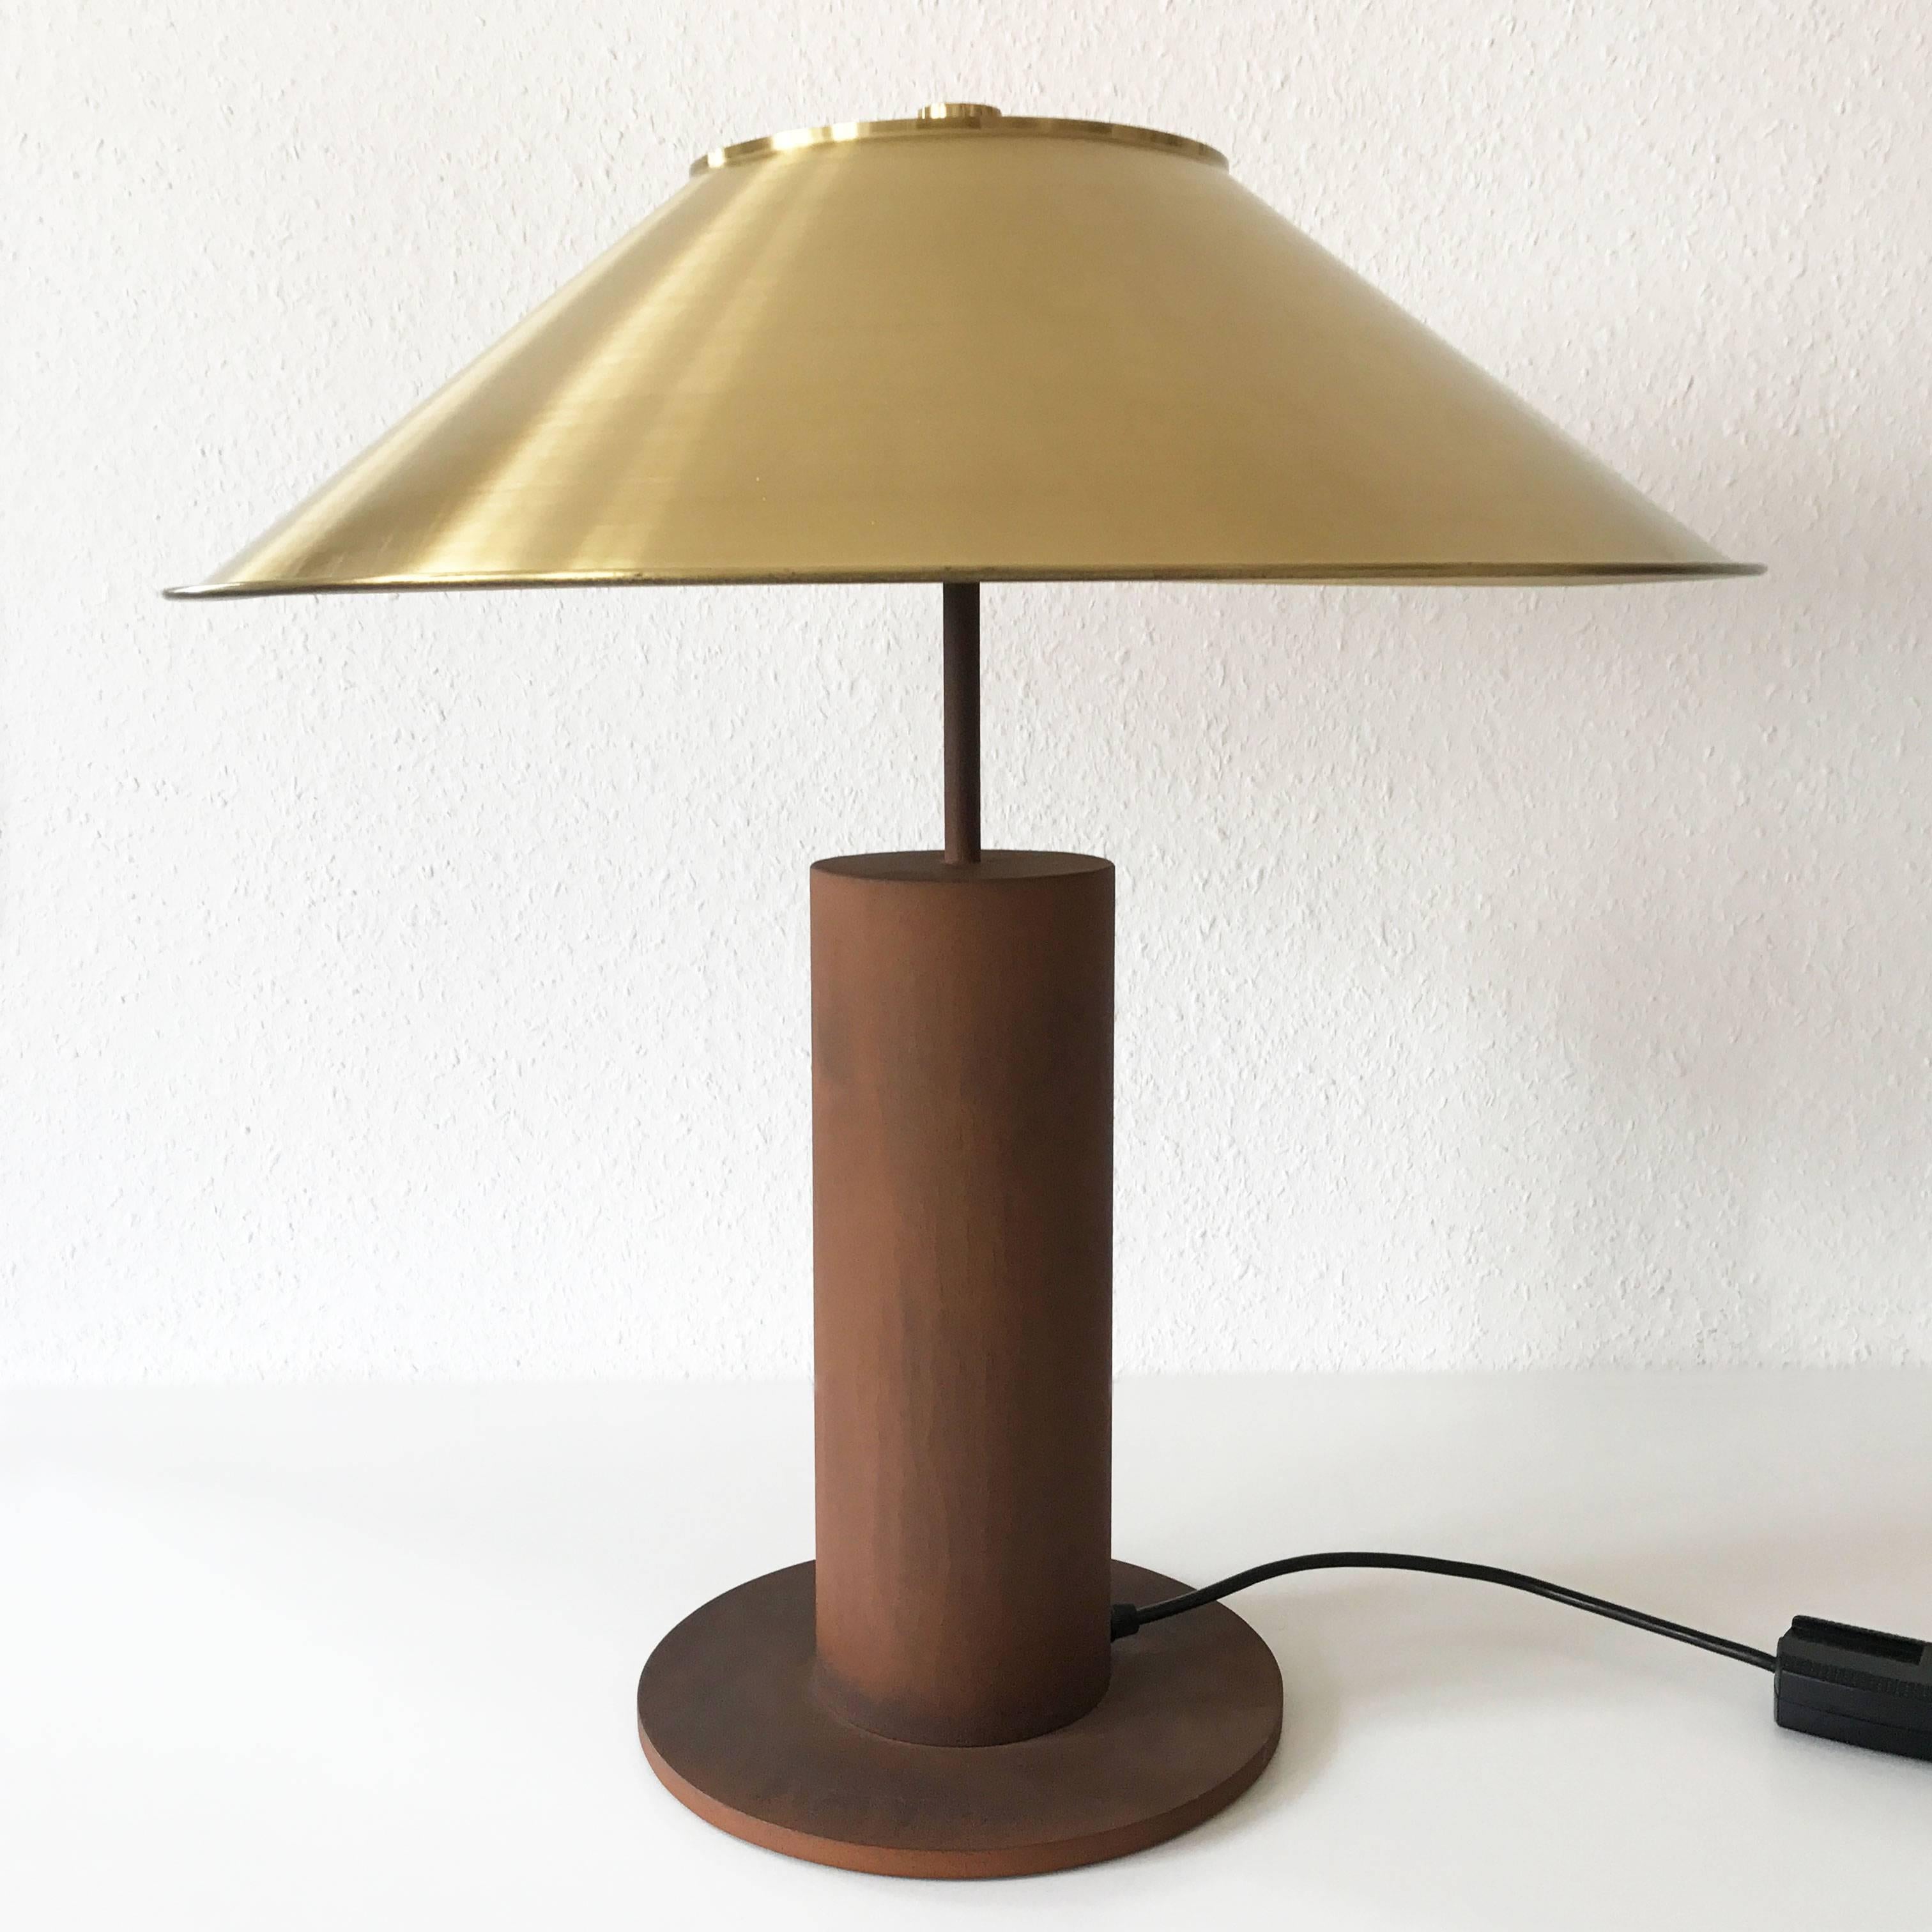 Large Mid Century Modern Table Lamp by Peter Prelller for Tecta Germany 1980s In Good Condition For Sale In Munich, DE